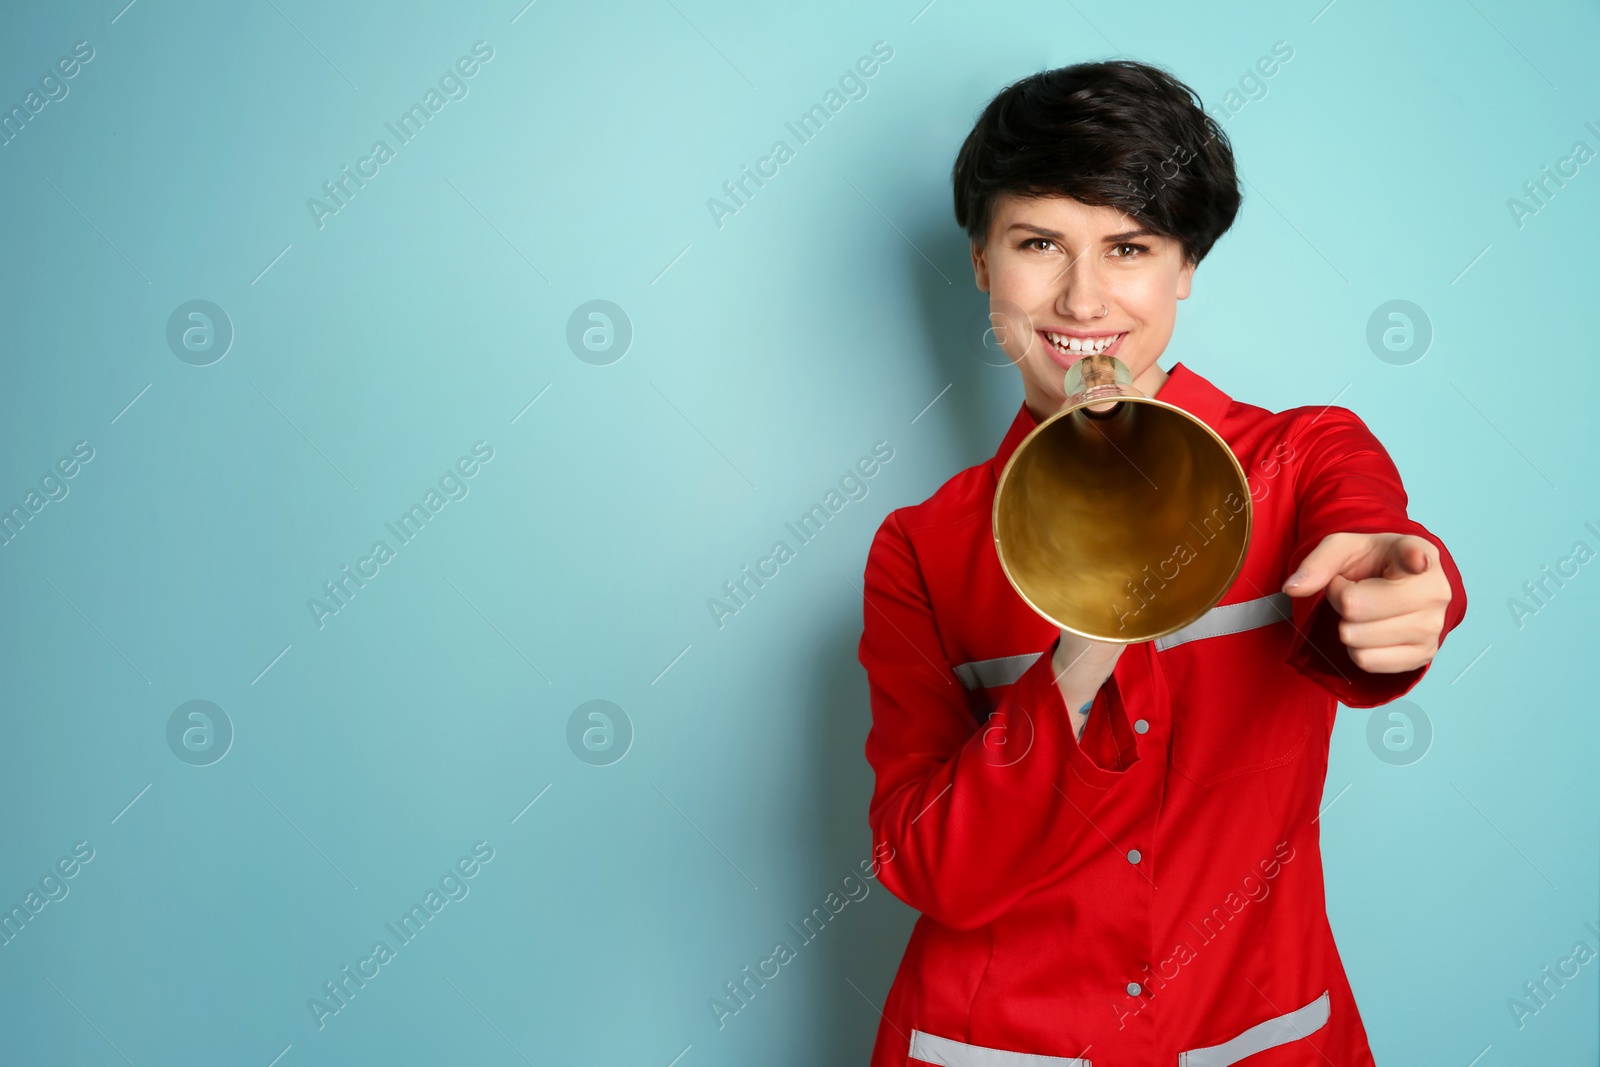 Photo of Young female doctor with megaphone on color background